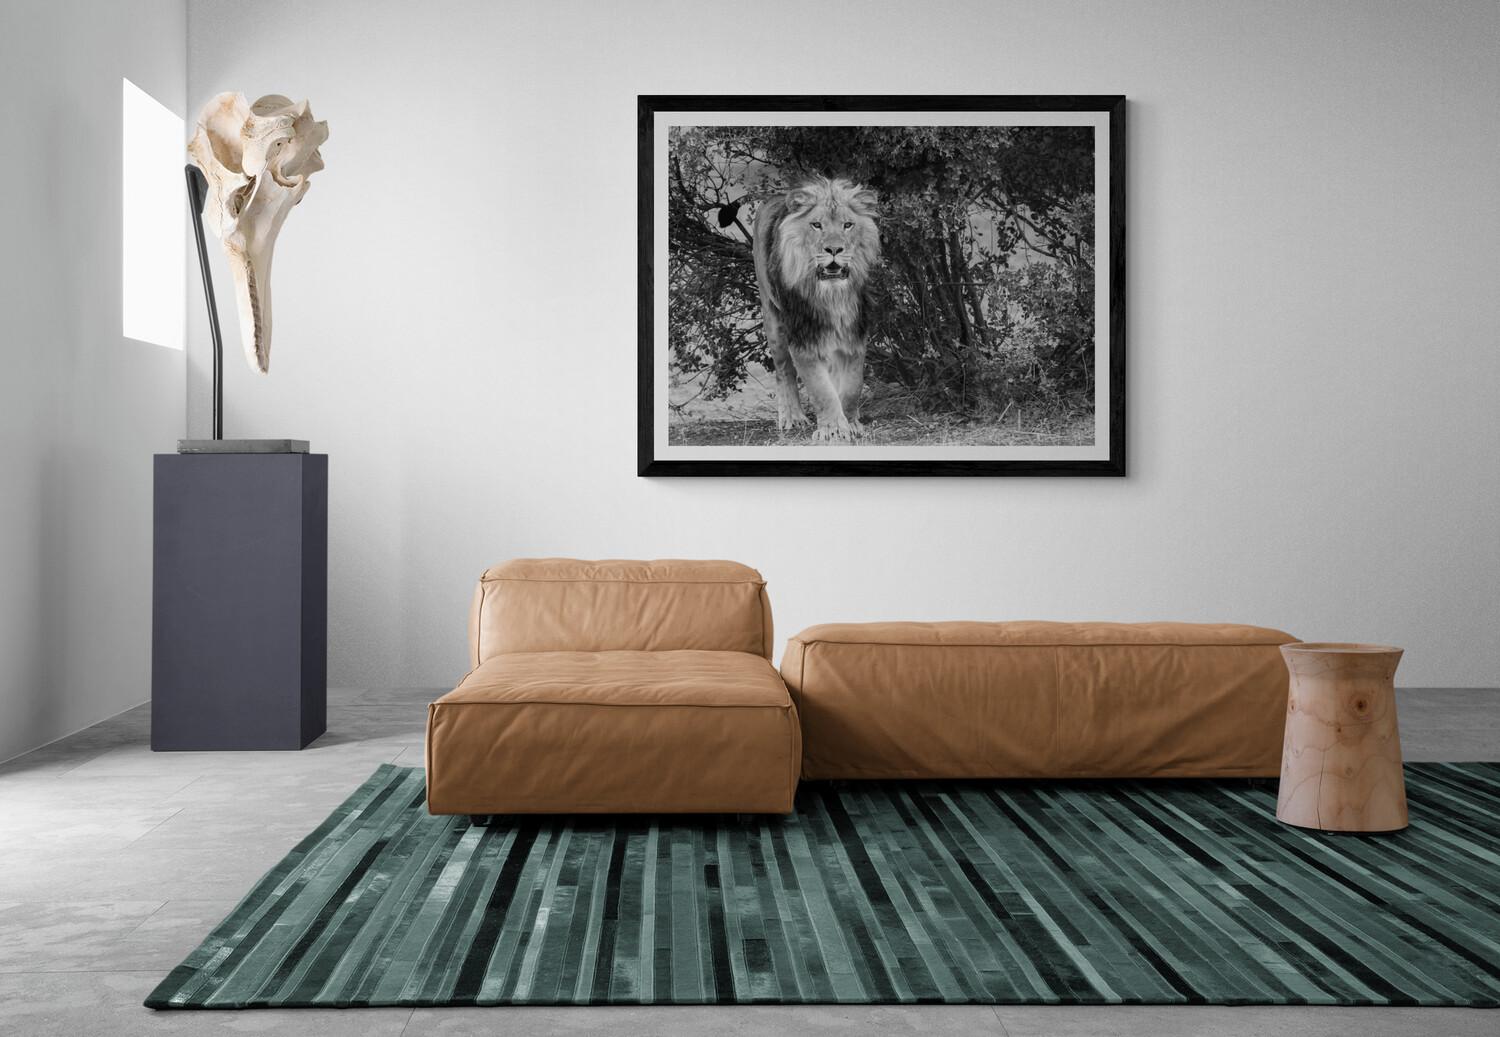 This is a contemporary photograph of an African Lion shot by Shane Russeck
36x48  edition of 12
Signed and numbered 
Printed on archival luster paper.  

Shane Russeck has built a reputation for capturing America's landscapes, cultures and